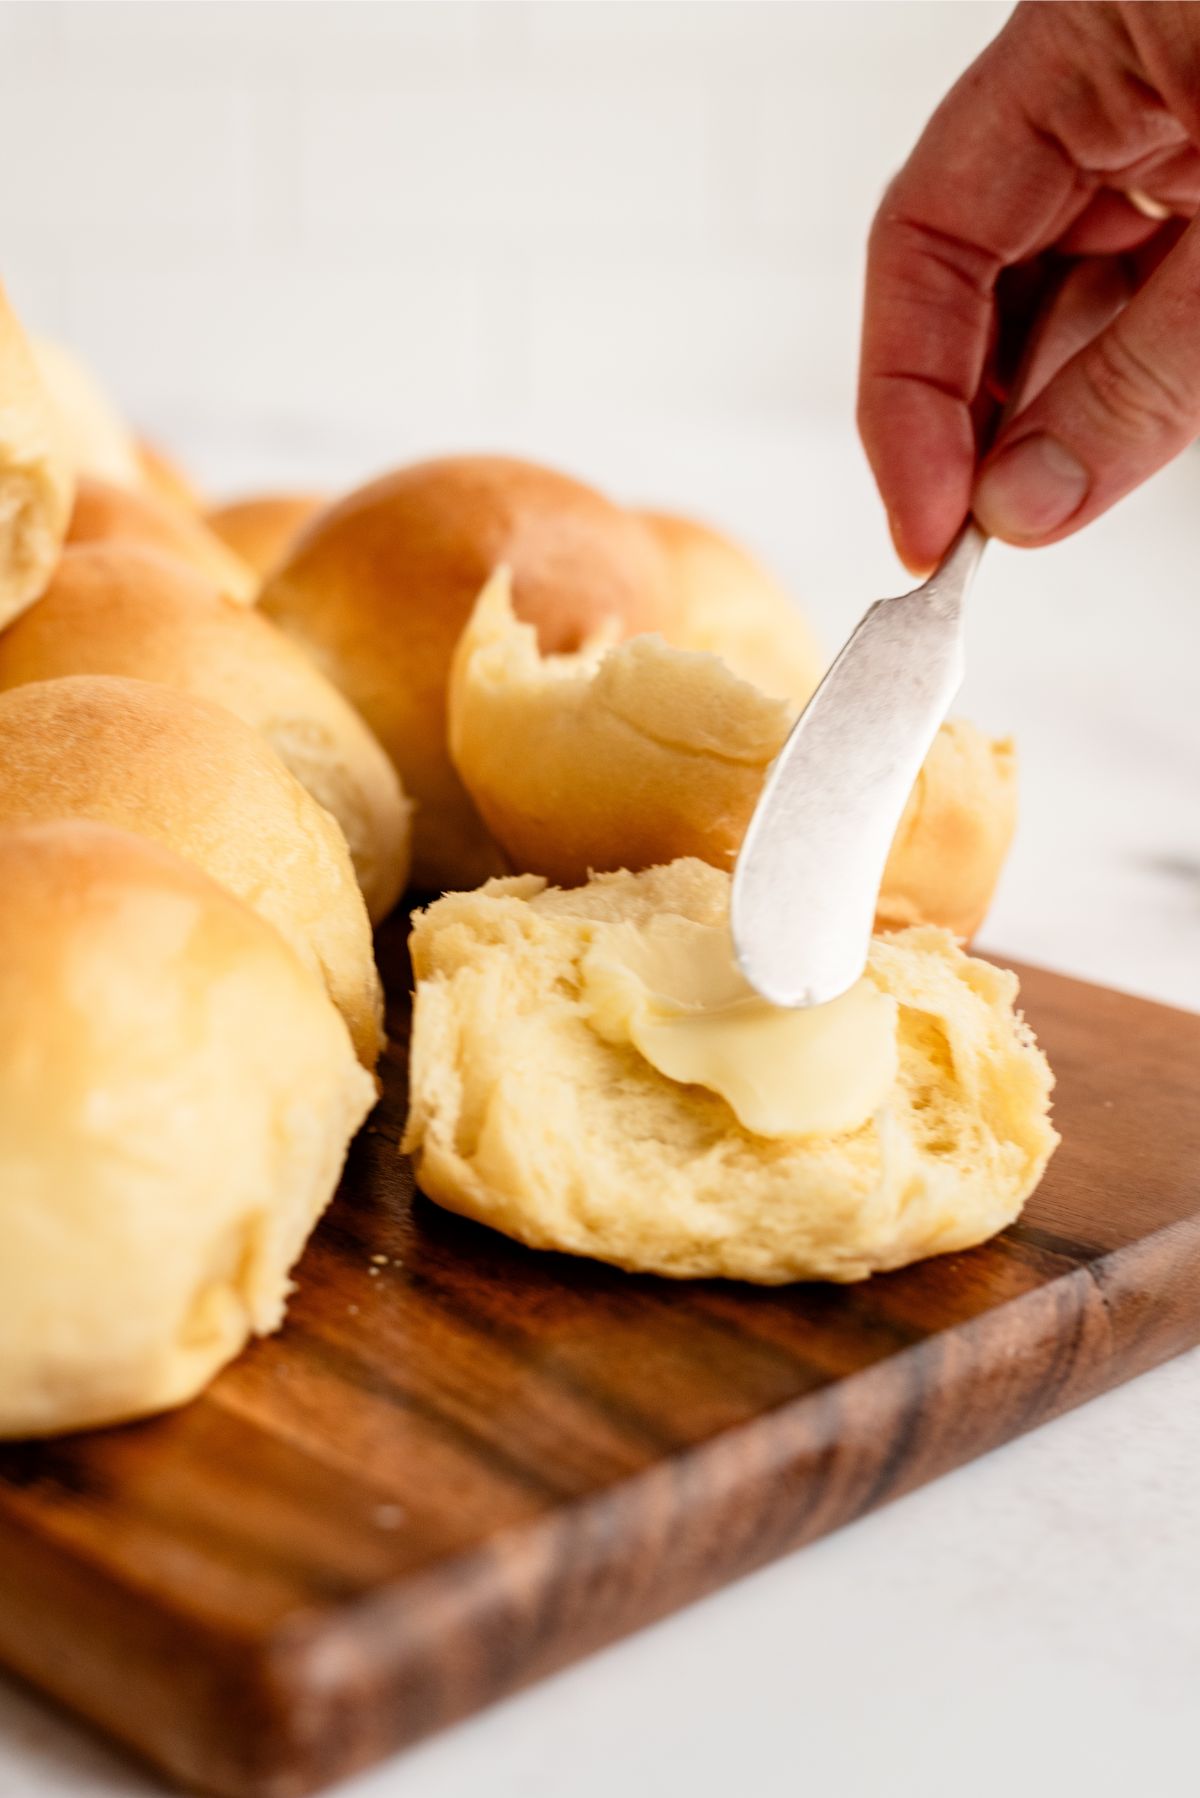 Spreading butter on a Parkerhouse Rolls